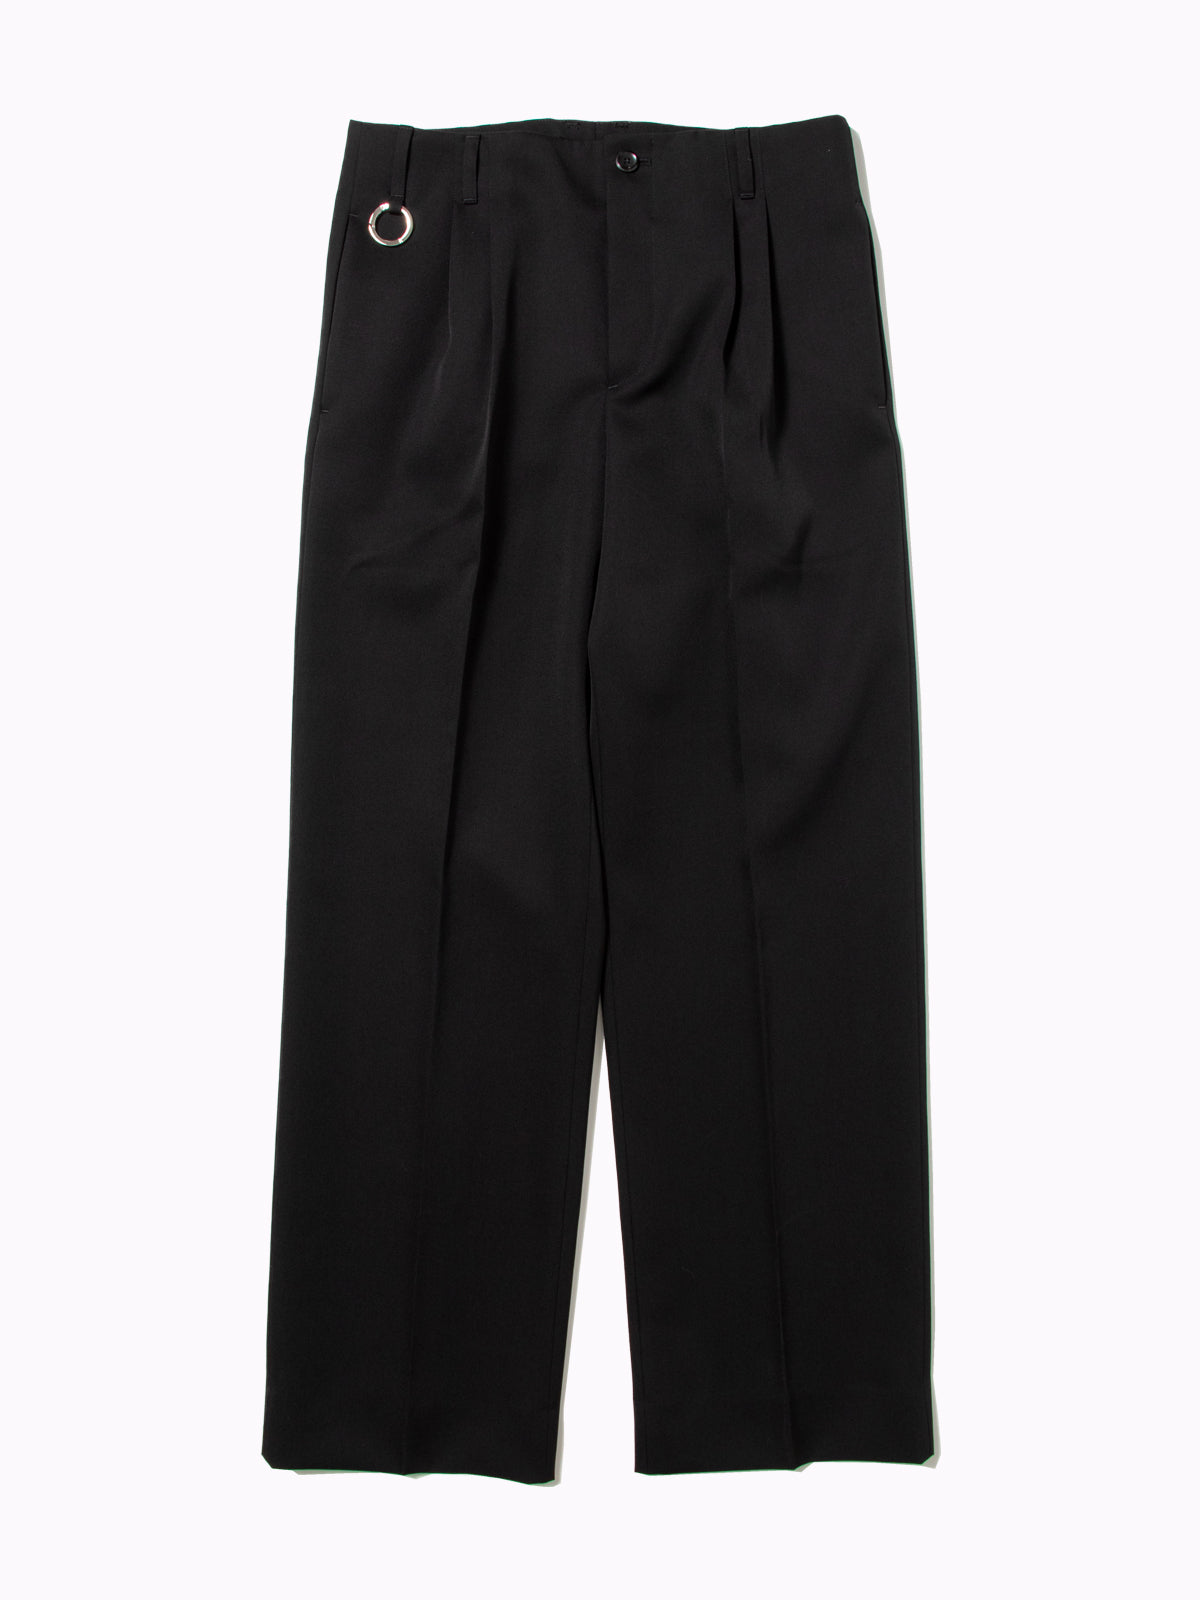 QUINN / Wide Tailored Pants (BLK) - Baby's all right